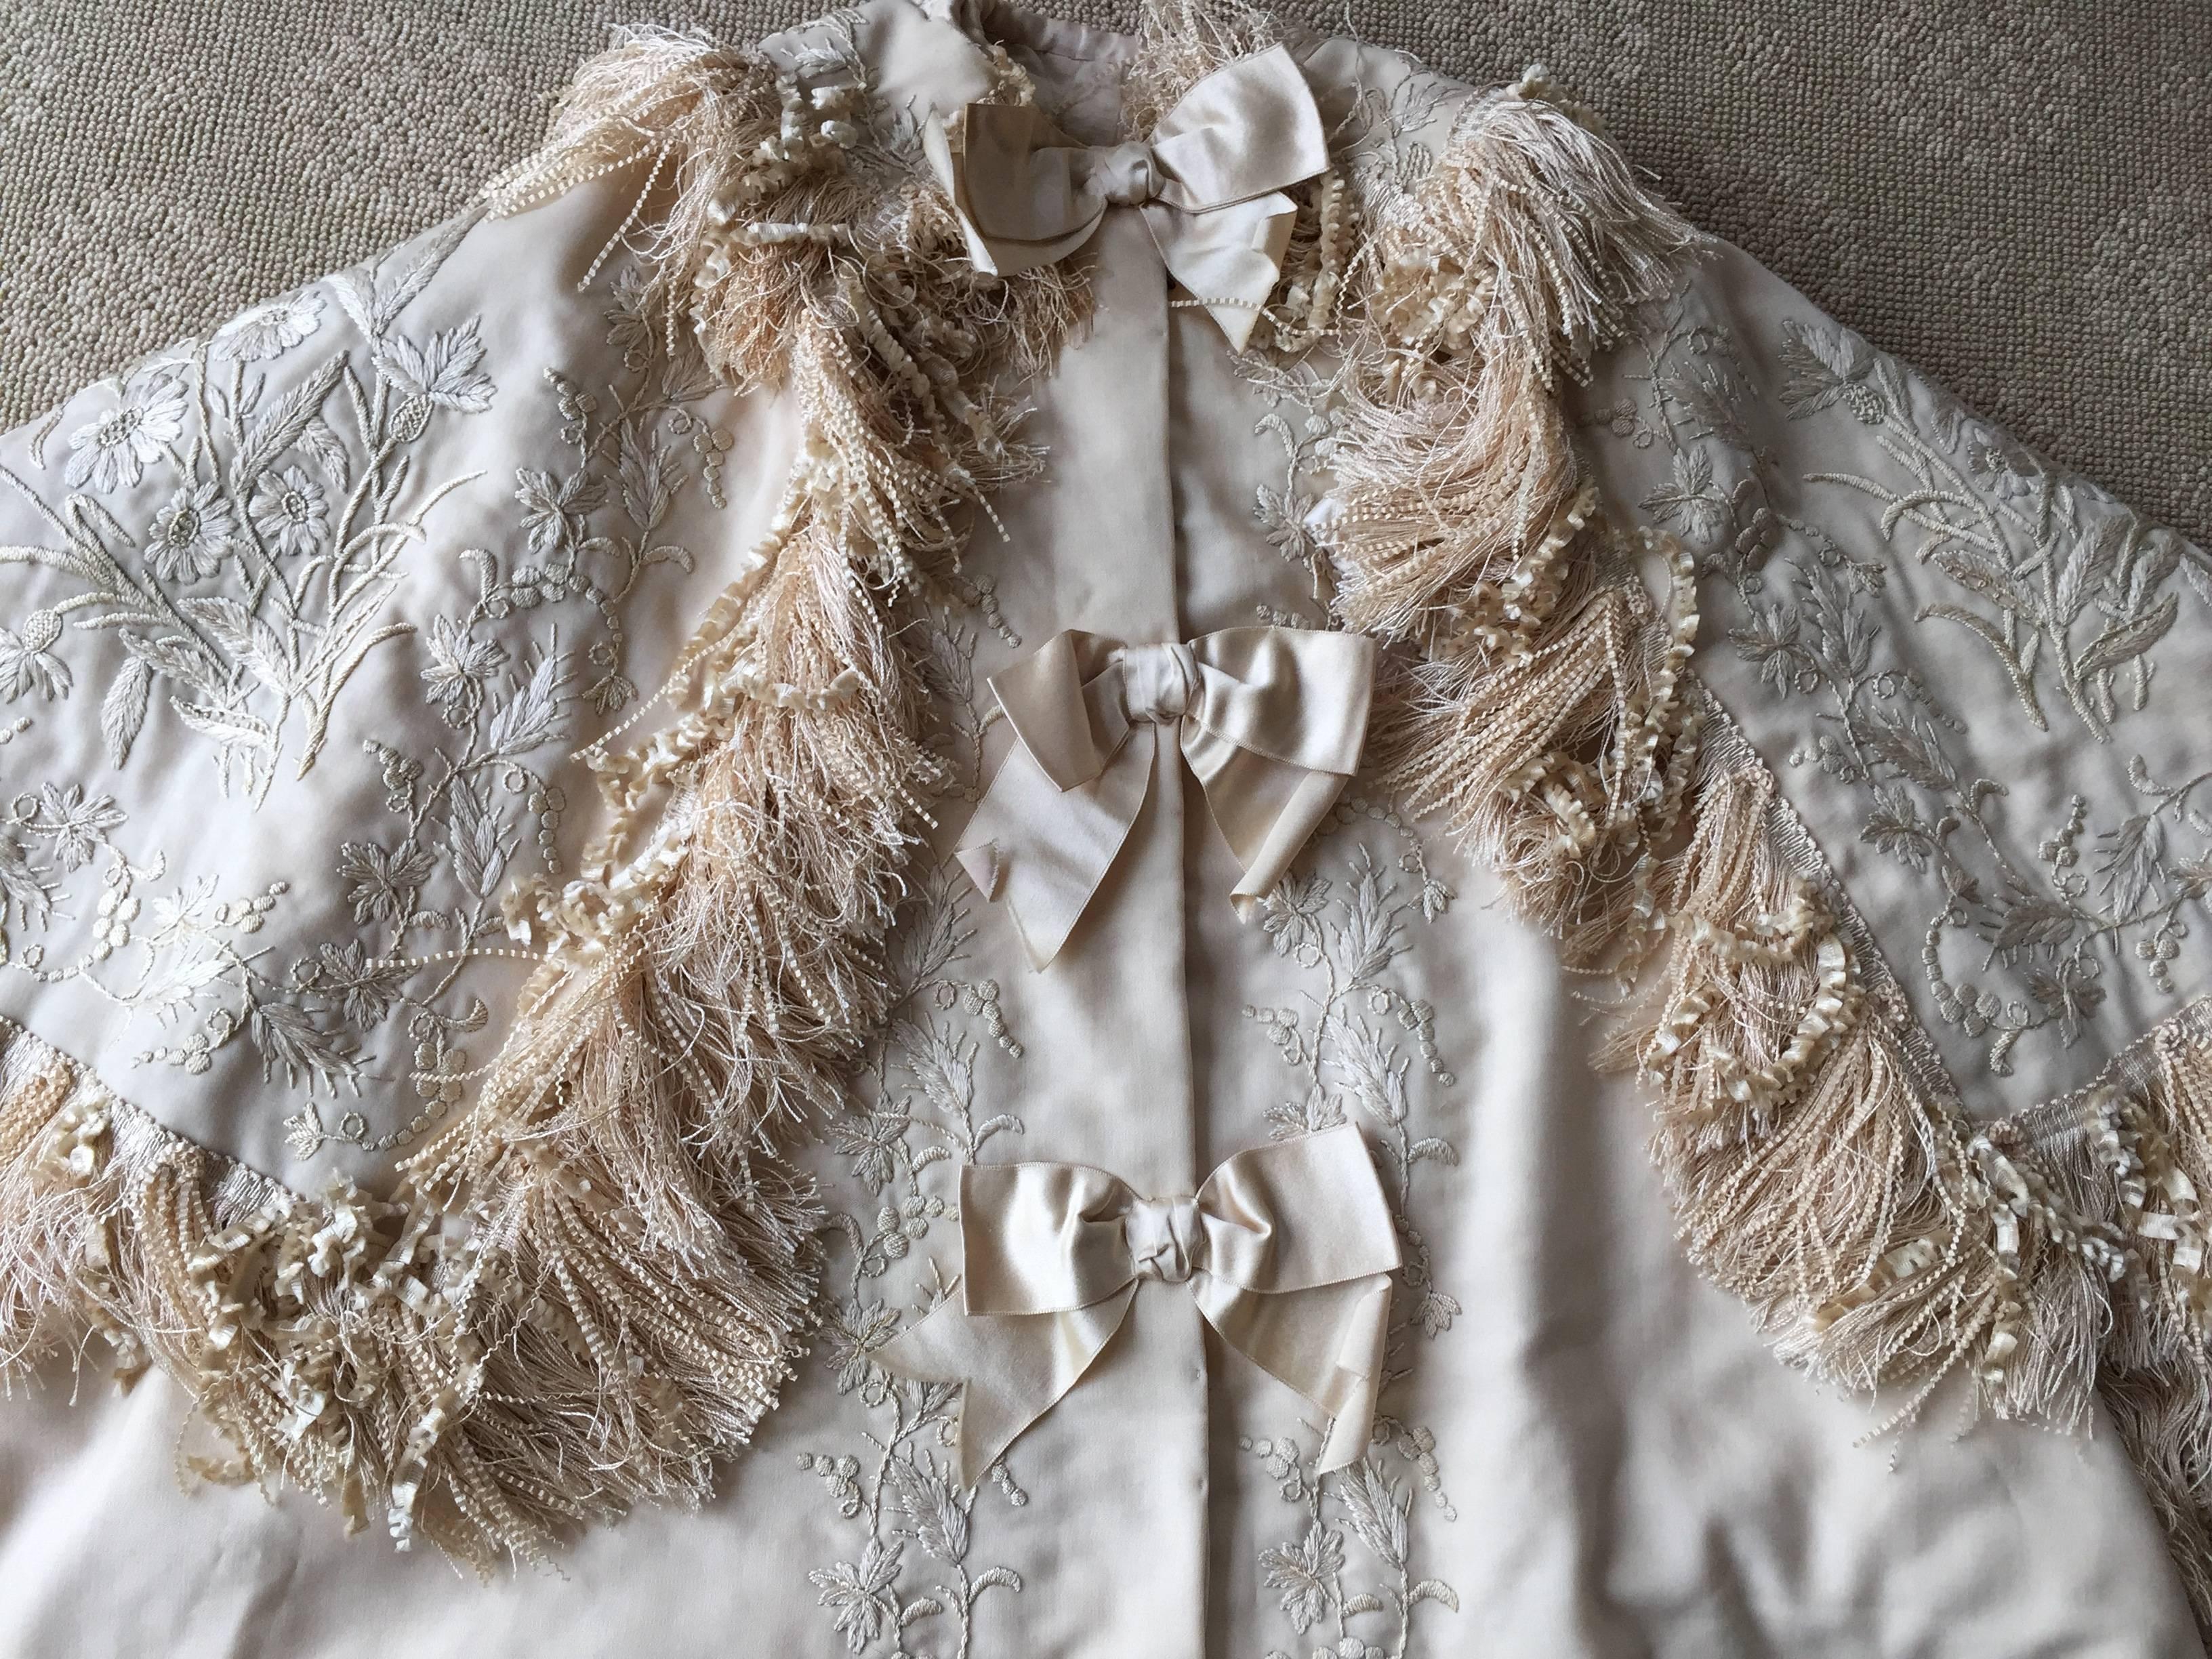 Remarkable christening robe with provenance.
This is such a beautiful piece, the embroidery and fancy trim in near pristine condition.
Quilted lining.
Measurements to follow.

From the de Guigné Estate. 
The de Guigné family has lived on the